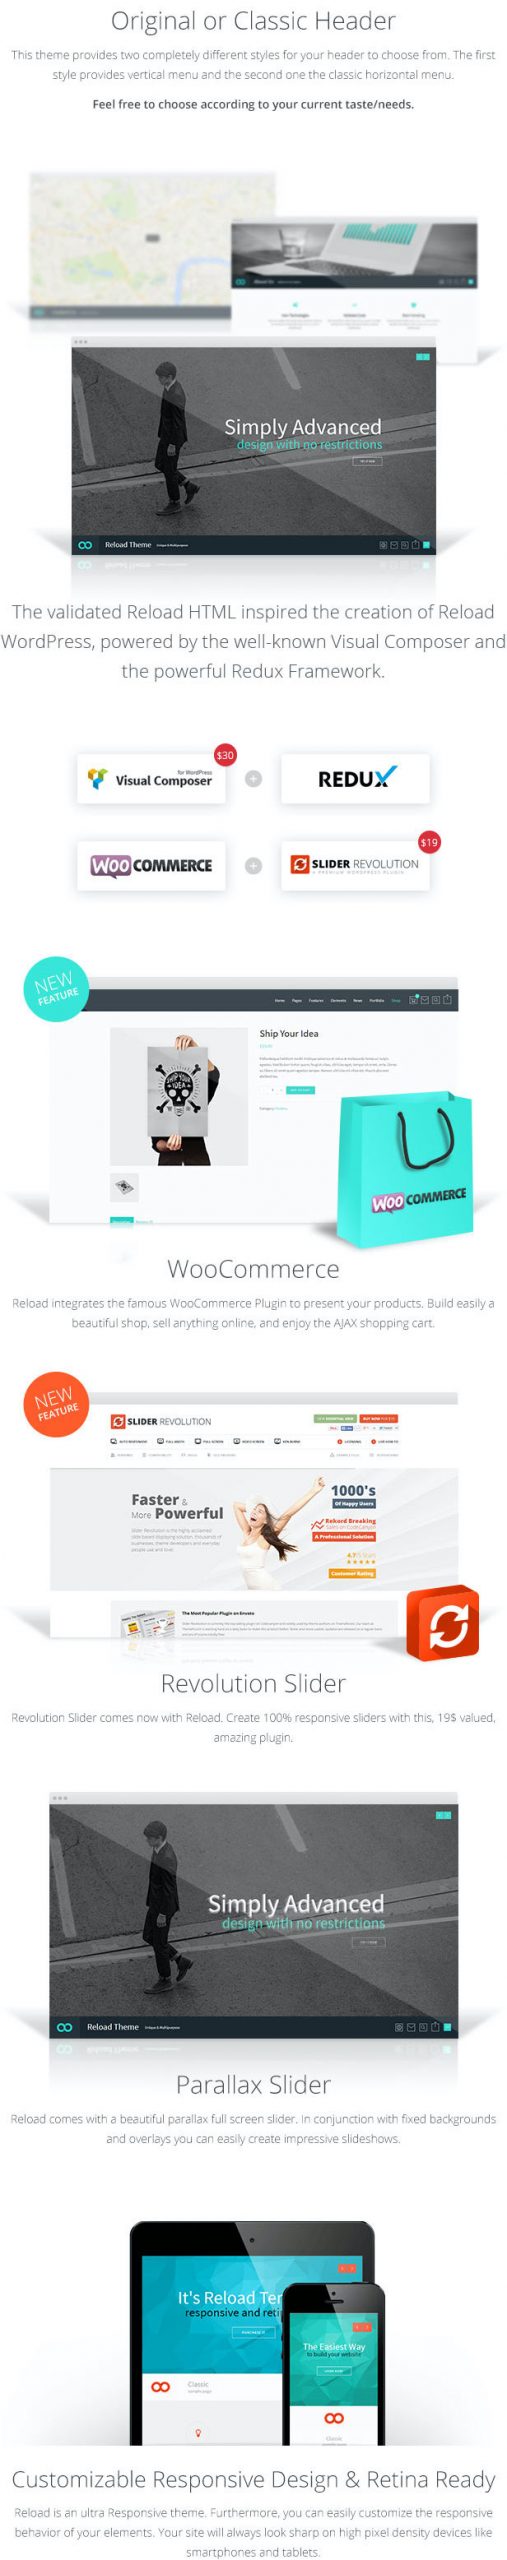 Reload - Premium WordPress theme by Greatives